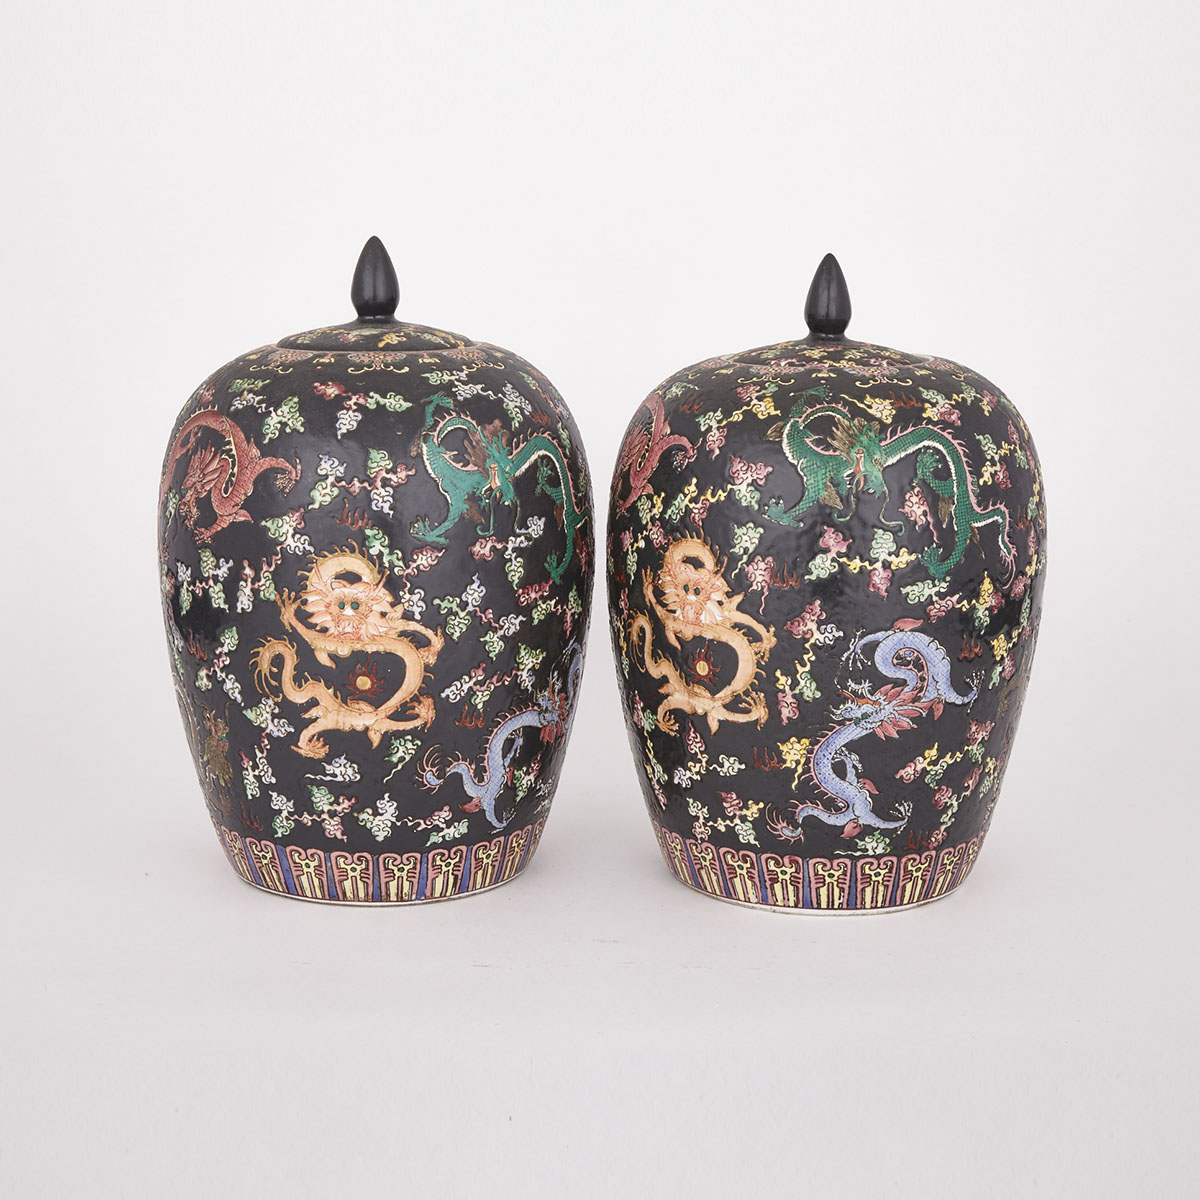 Pair of Famille Noir Covered Jars, Qianlong Mark, Early 20th Century